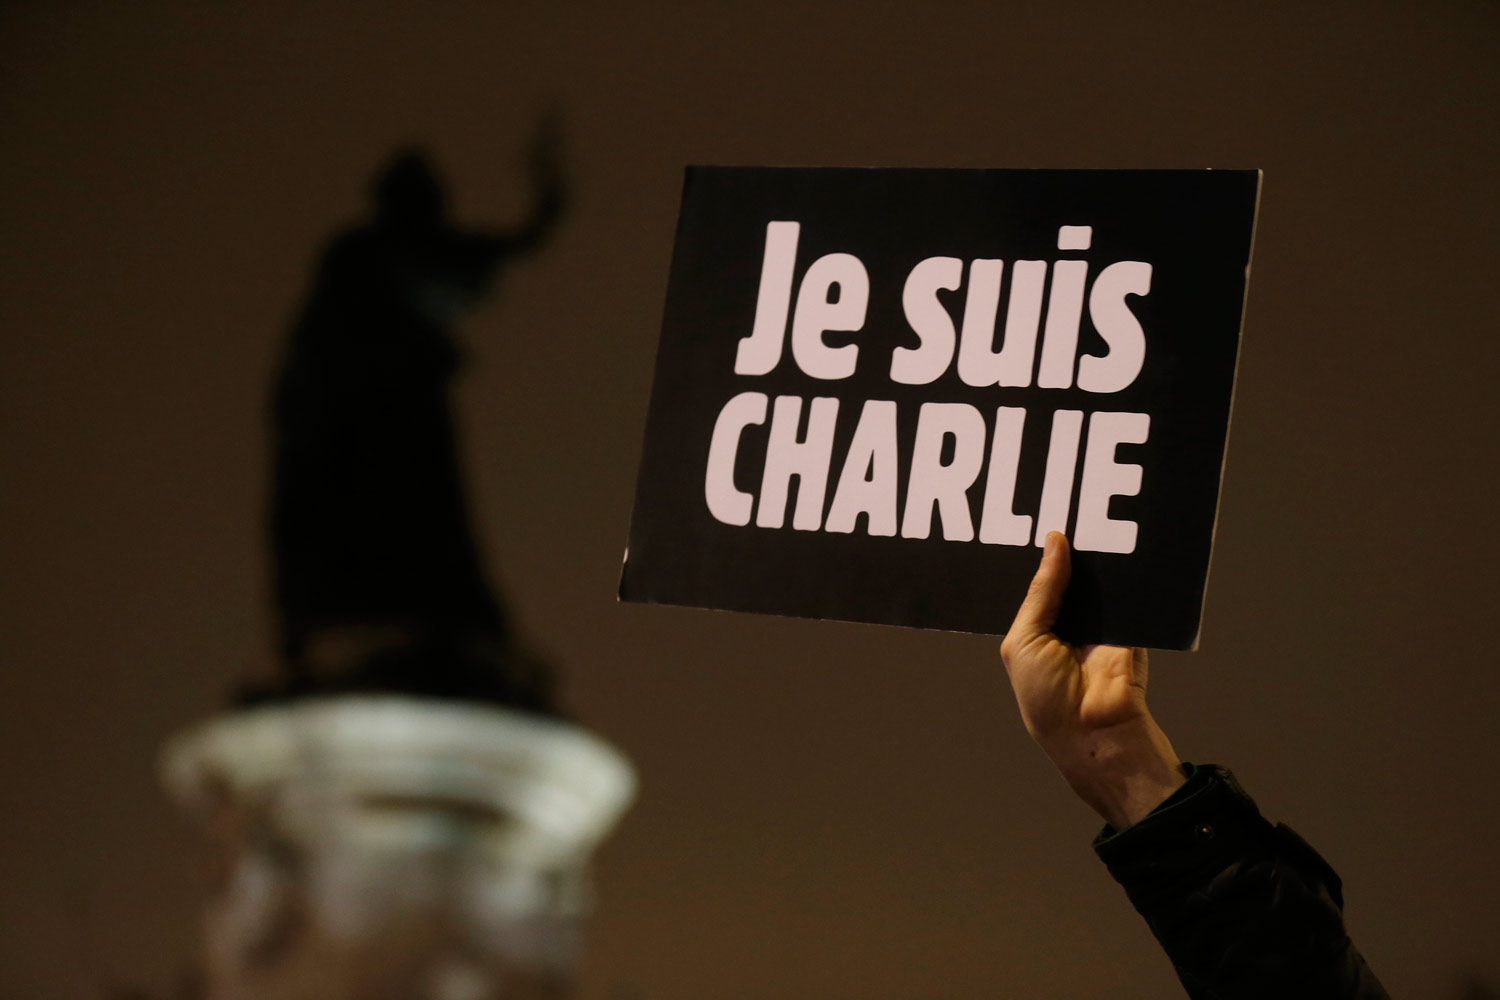 What Americans Should Do After Charlie Hebdo